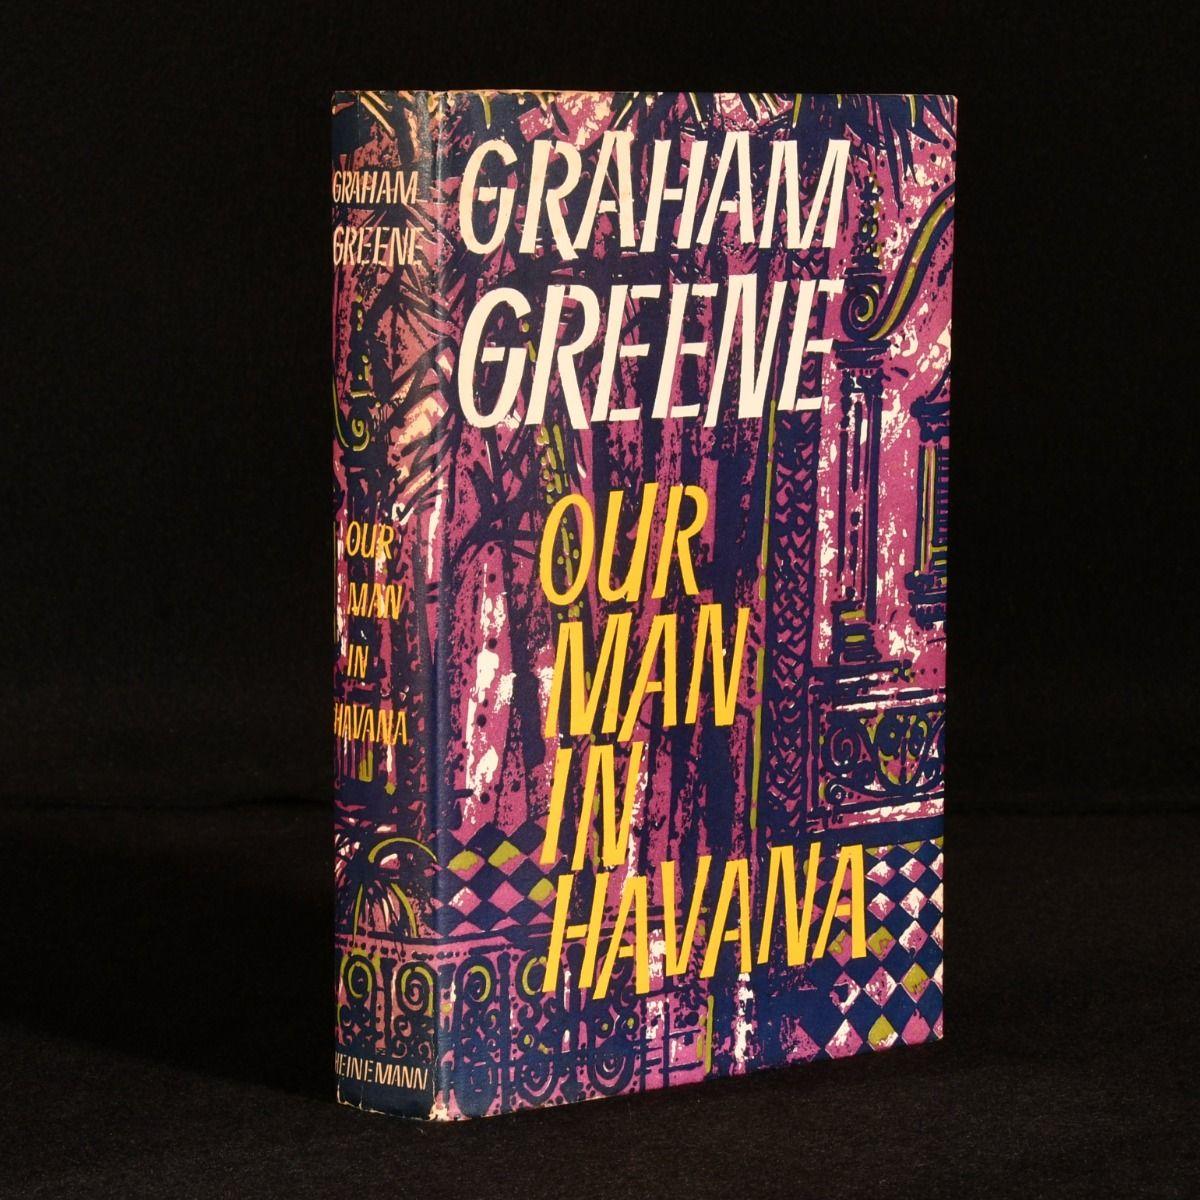 A smart first edition copy of this black comedy by Graham Greene, an exceptional novel by one of the leading writers of the twentieth century, scarce to see in the promotional wraparound band.

The first edition, first impression of this work.

In